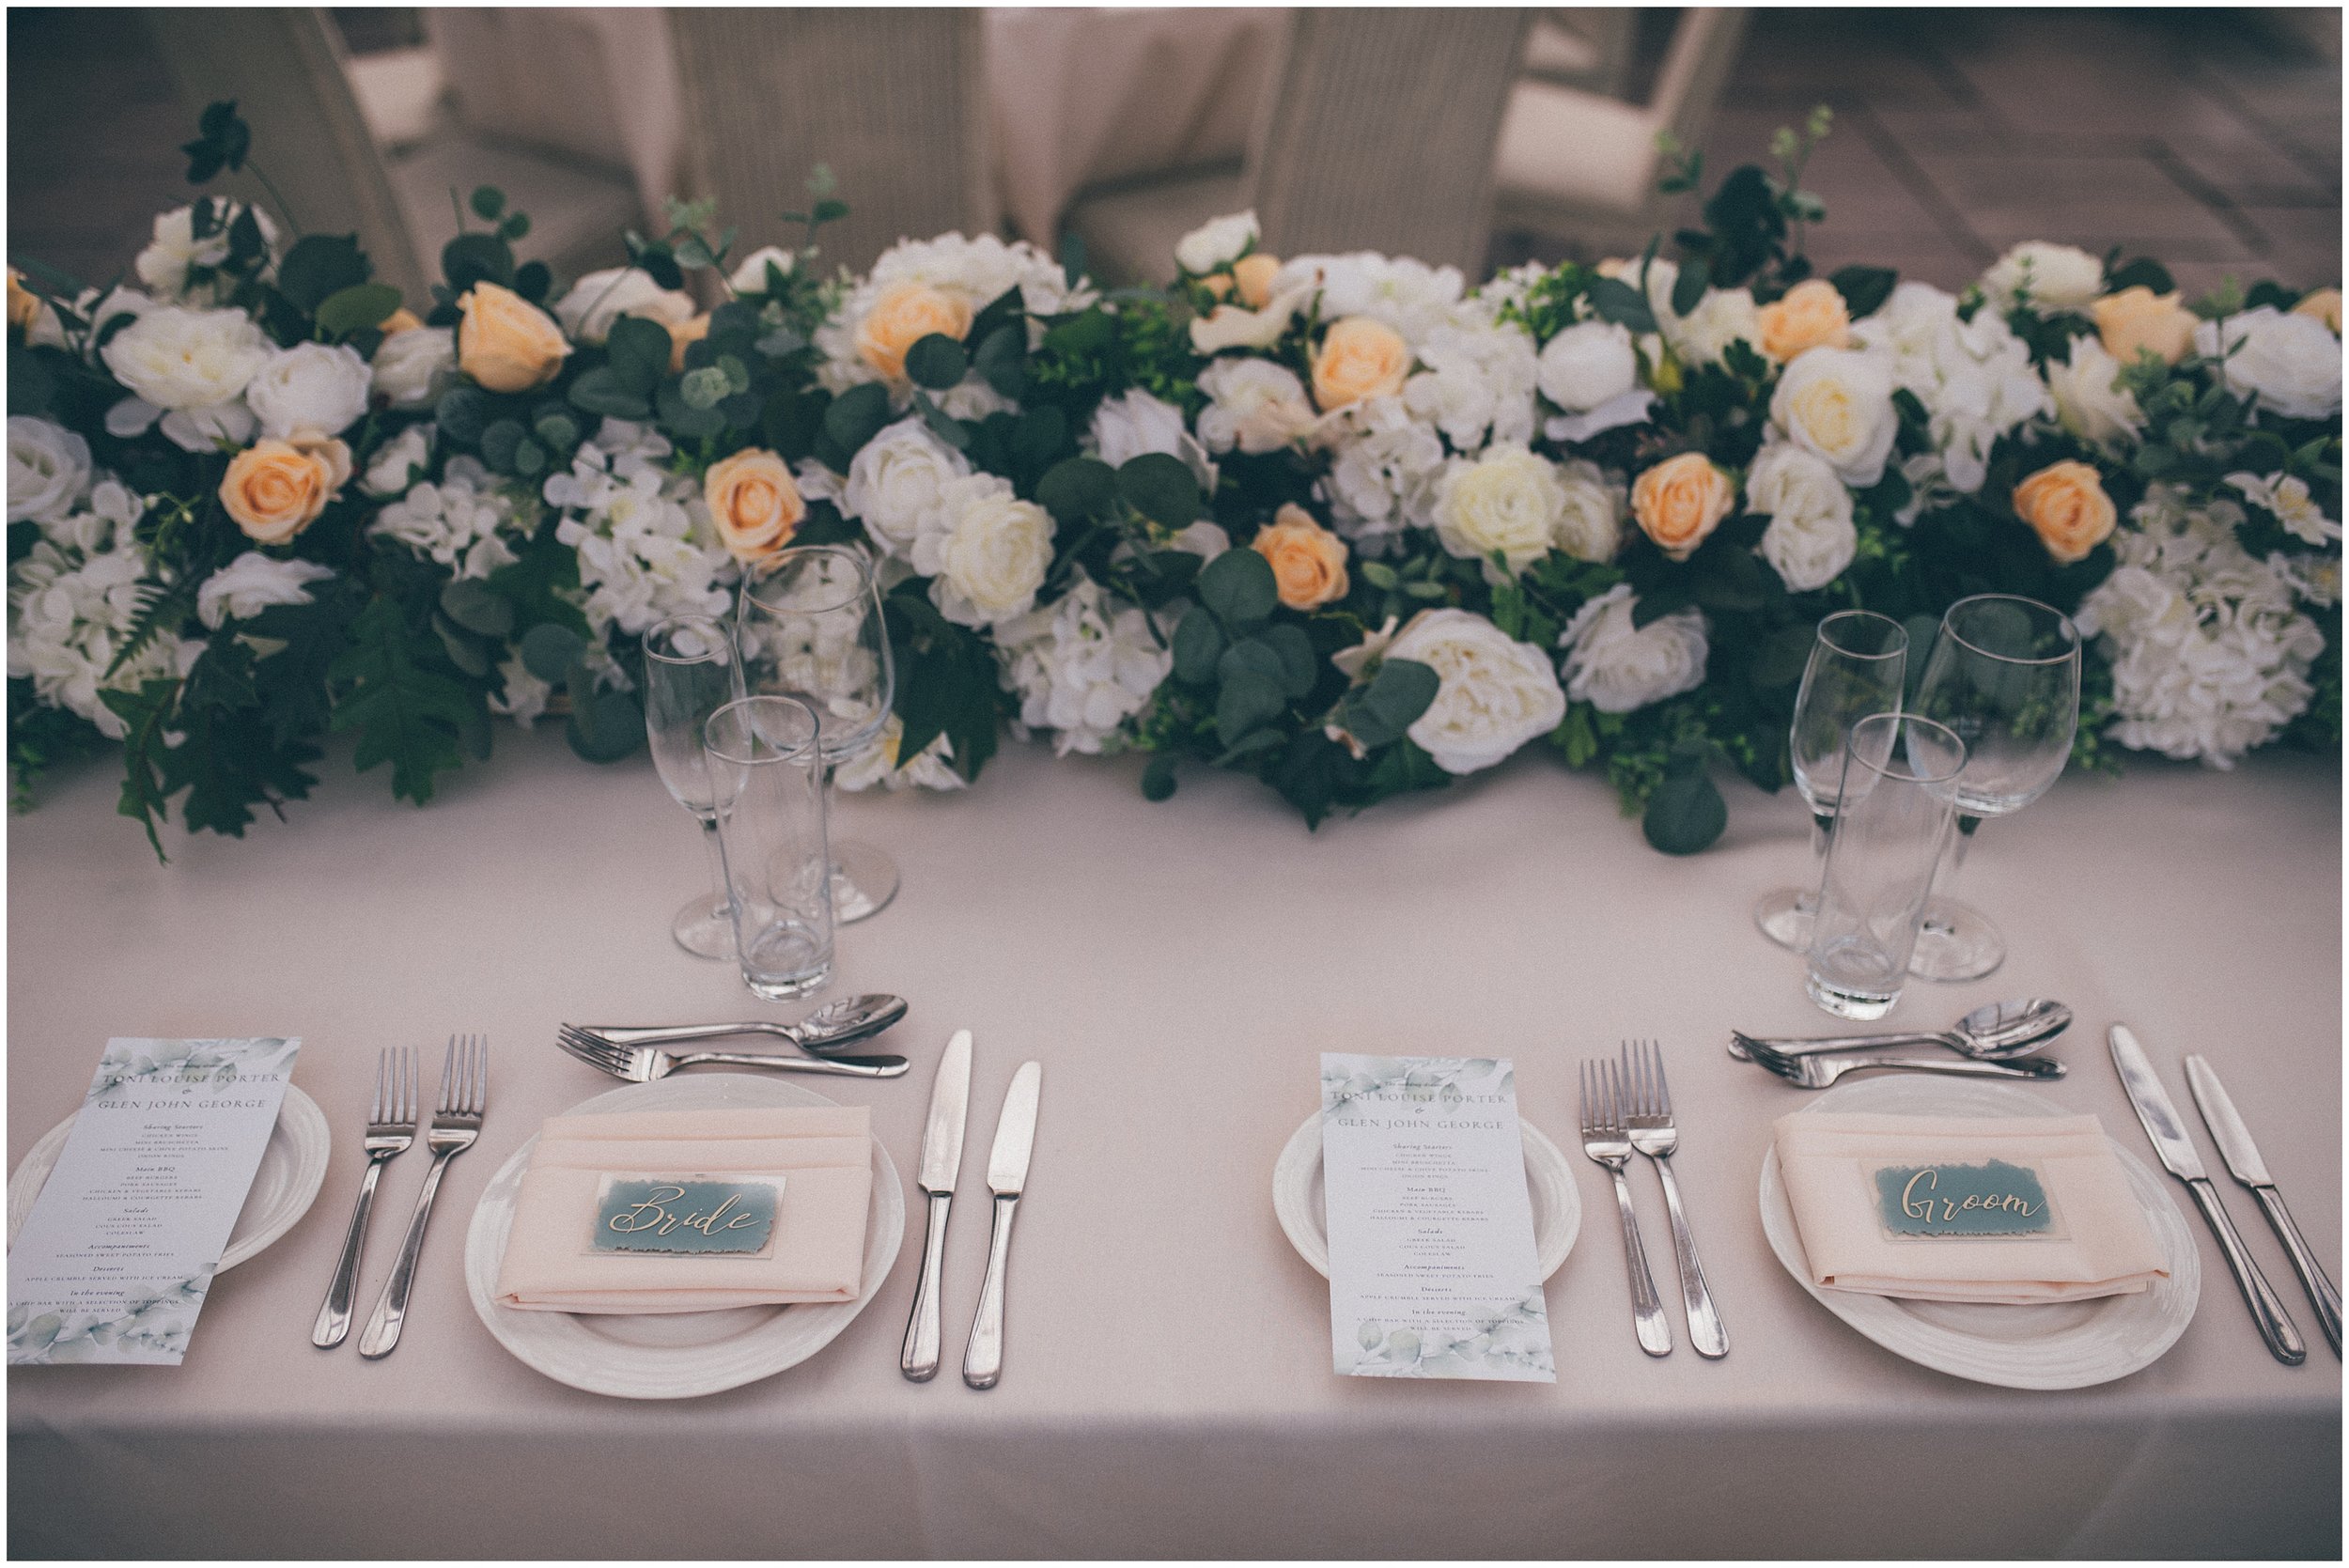 Beautiful and classic set-up at Abbeywood Estate conservatory for a summer wedding.